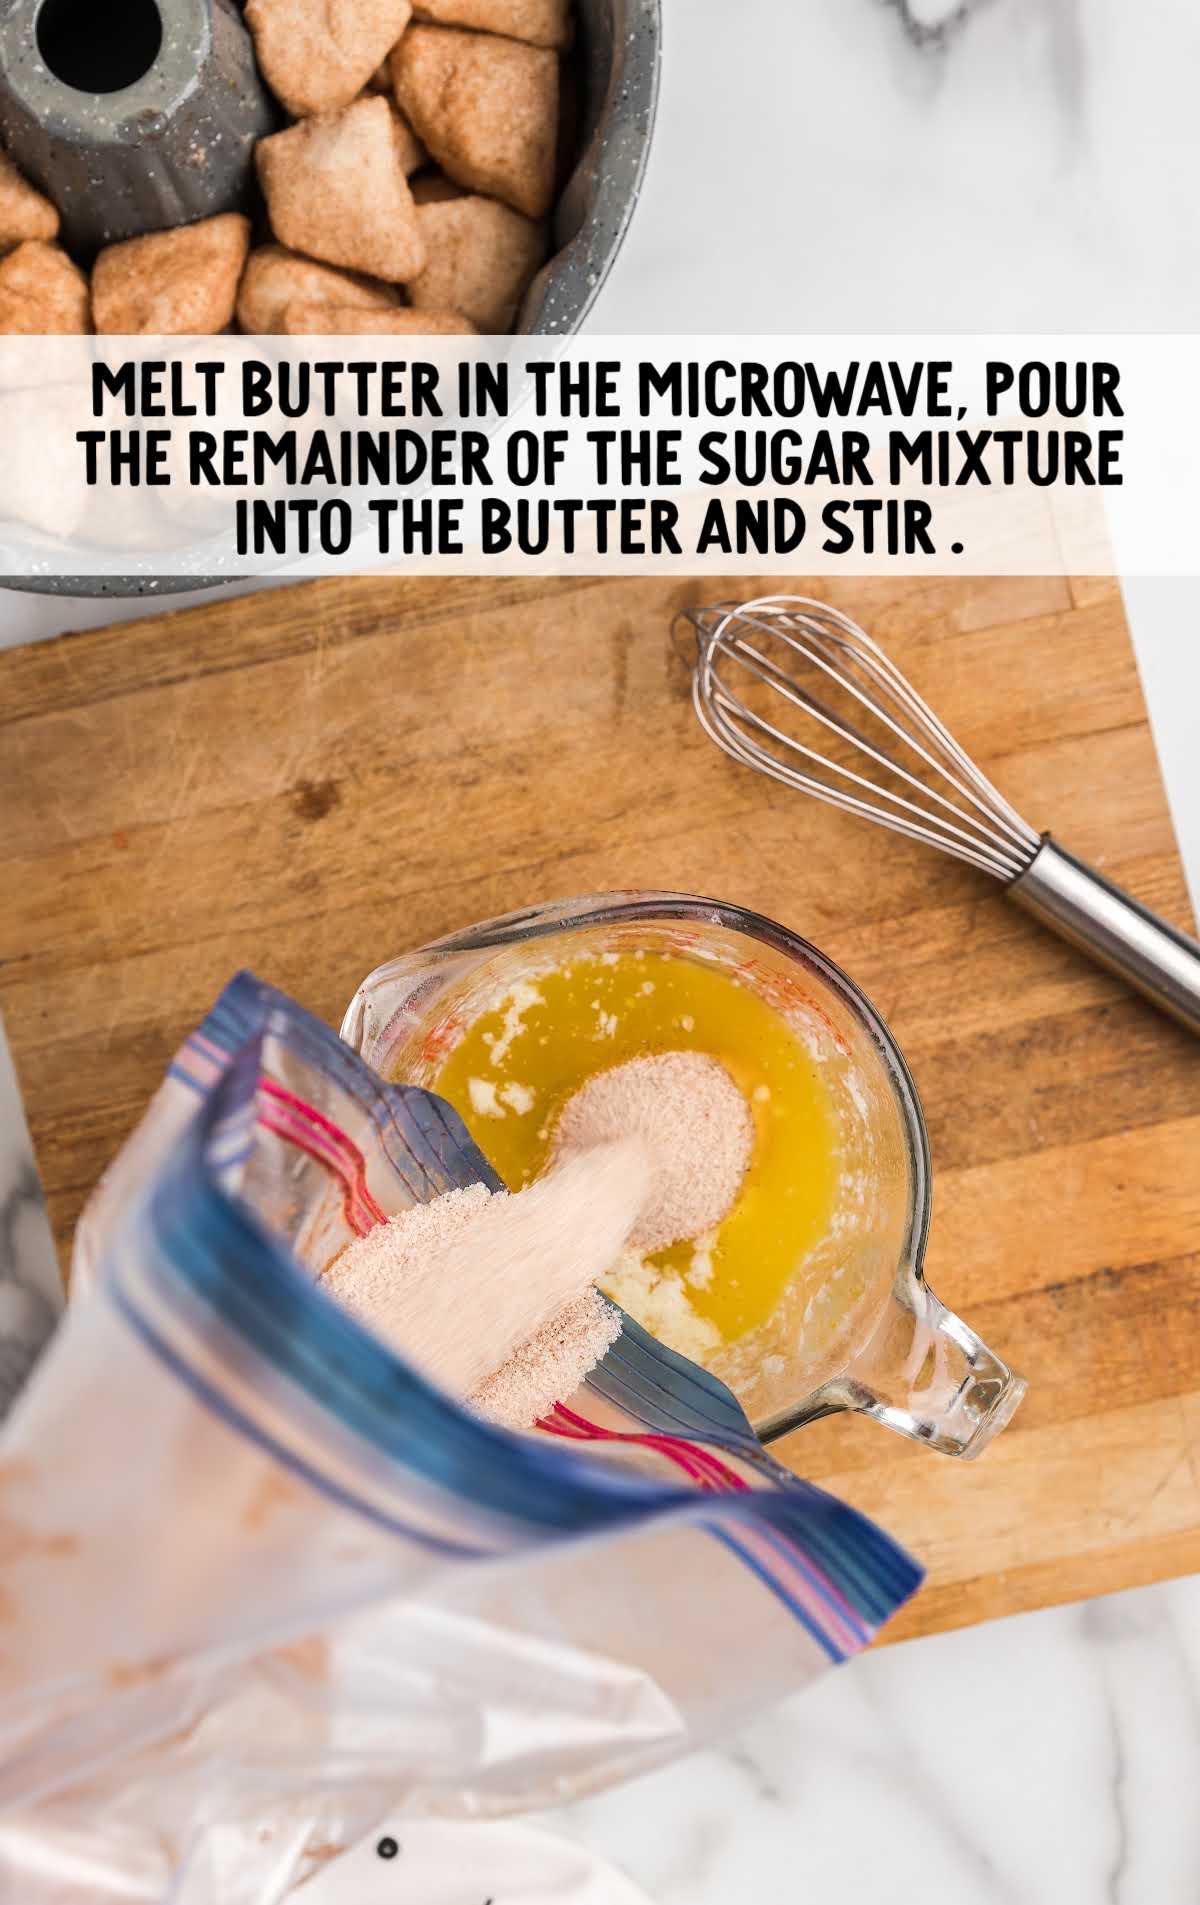 cinnamon mixture placed into a measuring cup of melted butter